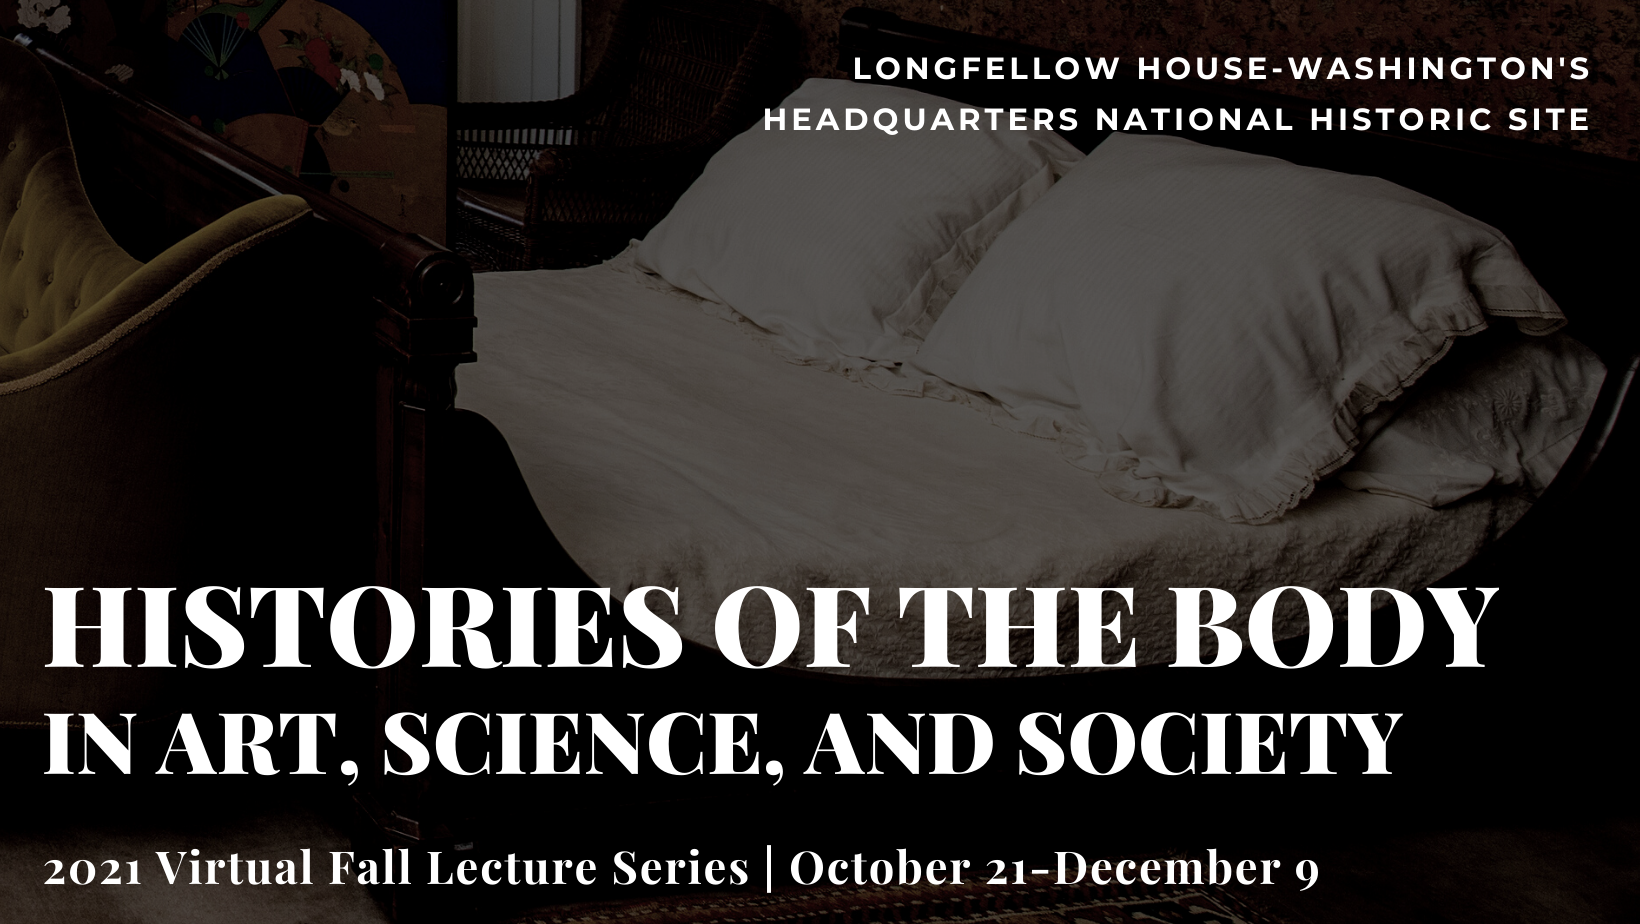 Banner for the event "Histories of the Body in Art Science and Society"